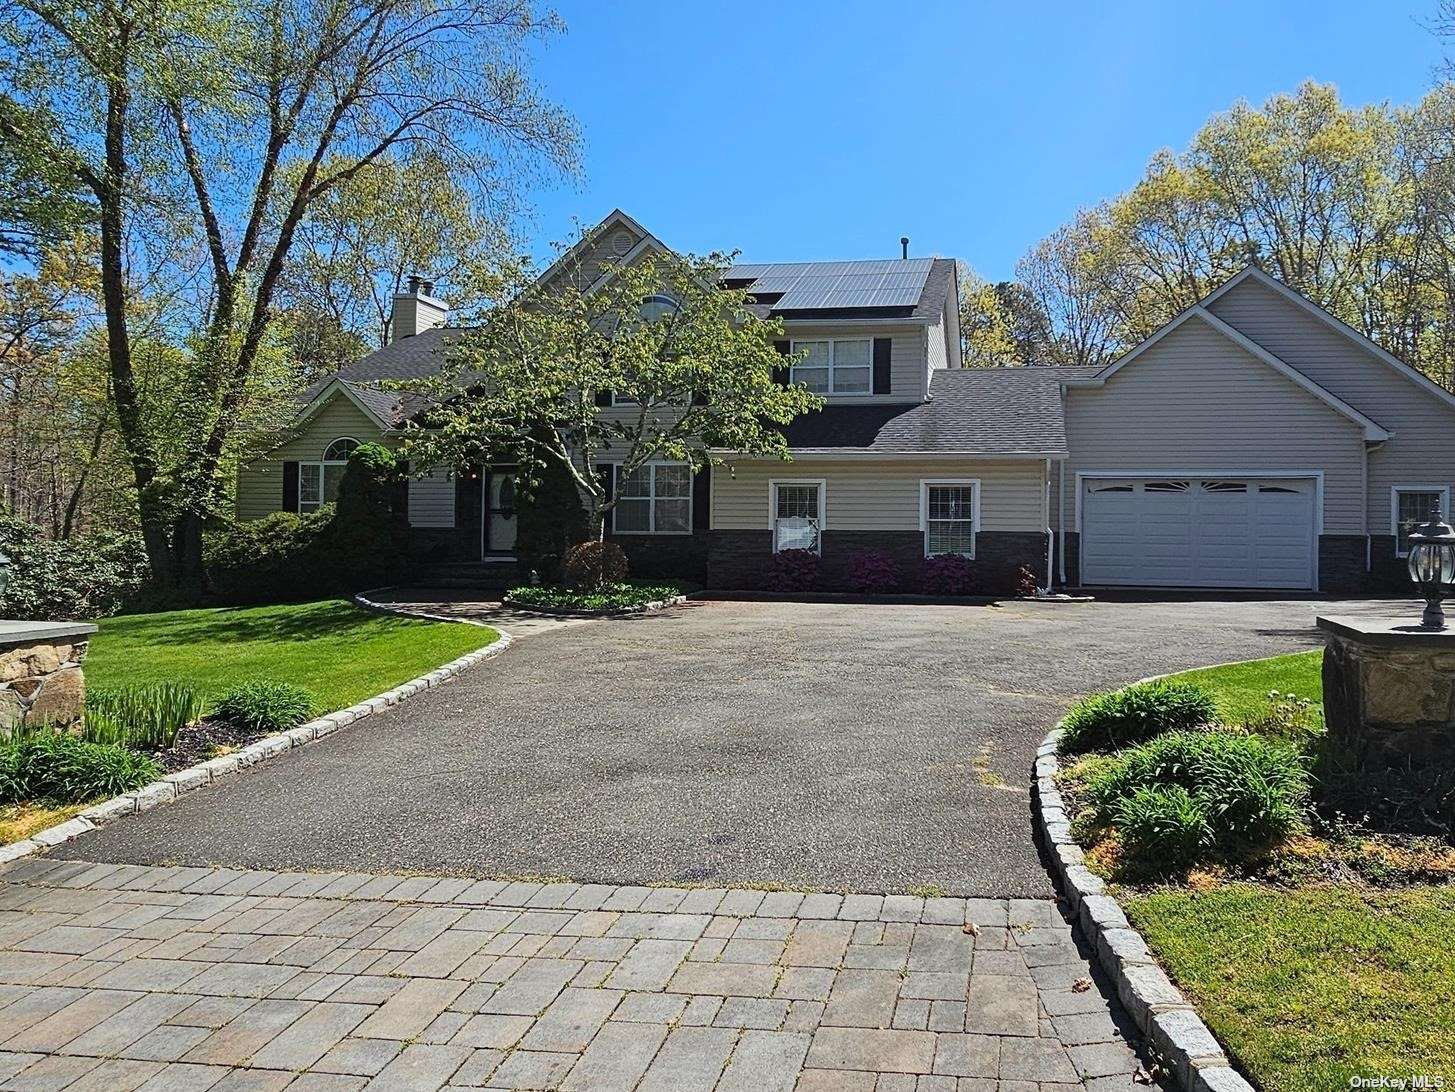 19 Silas Woods Road, Manorville, Hamptons, NY - 5 Bedrooms  
3 Bathrooms - 